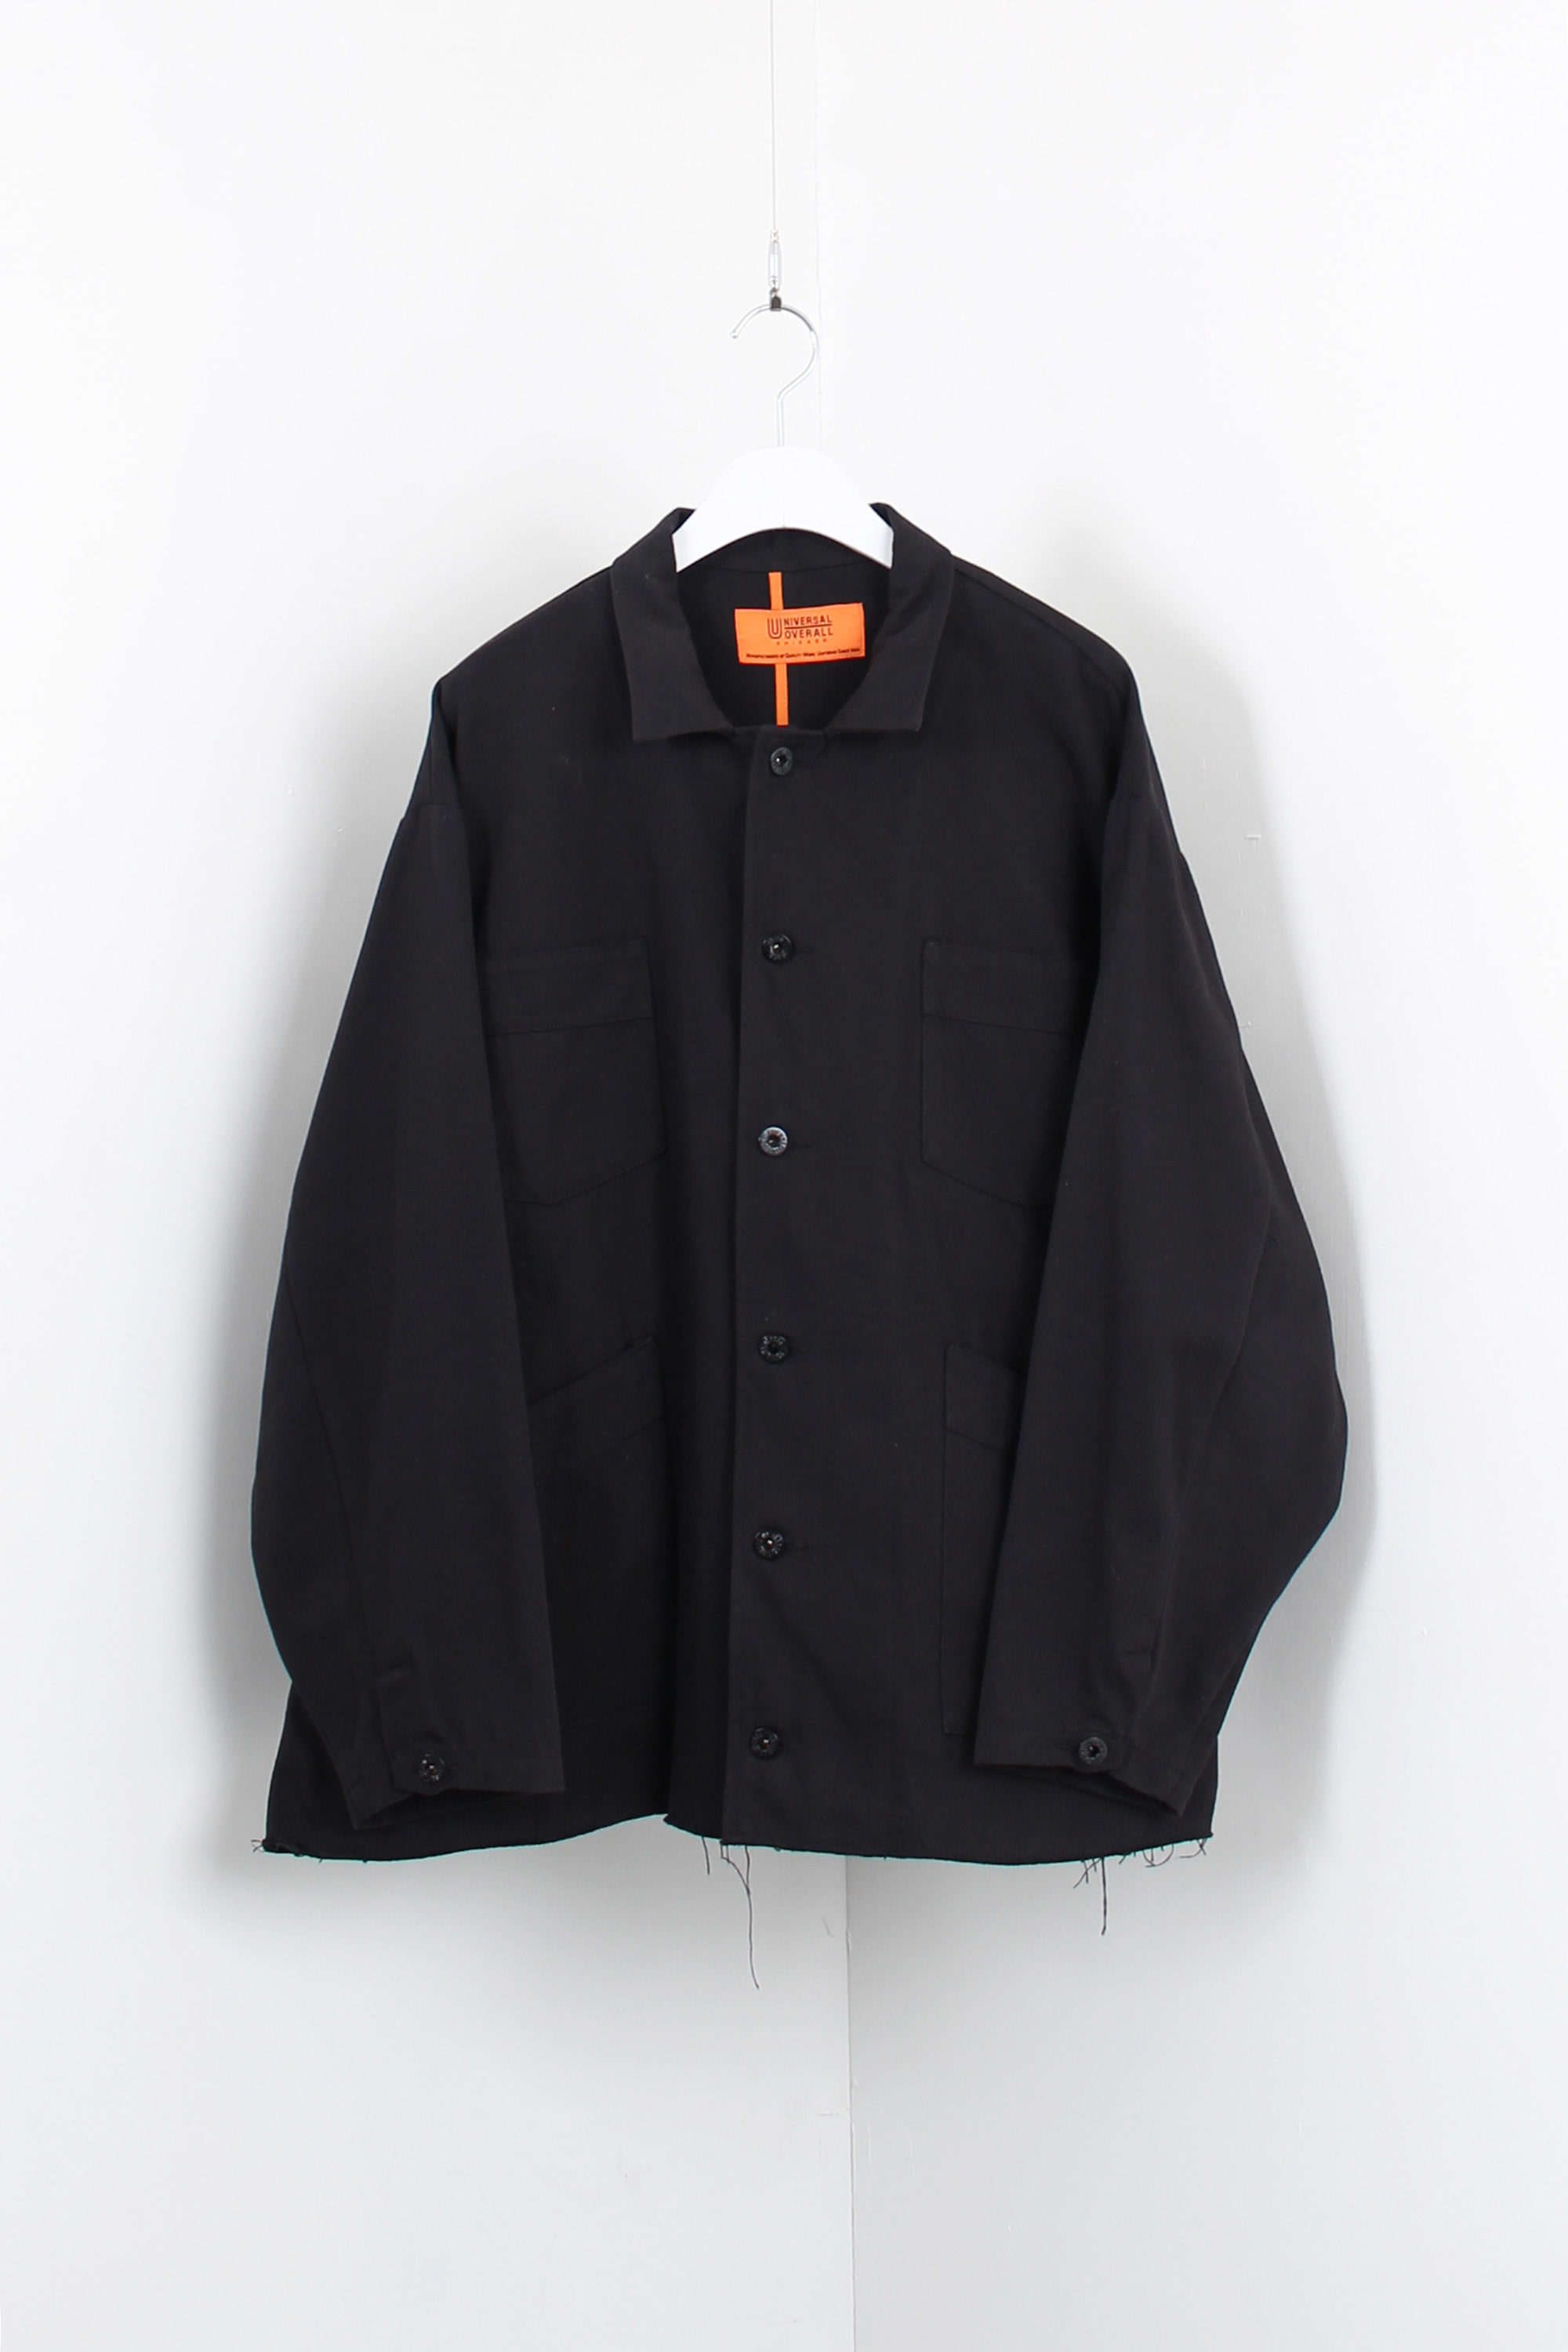 UNIVERSAL OVERALL COVERALL work jacket